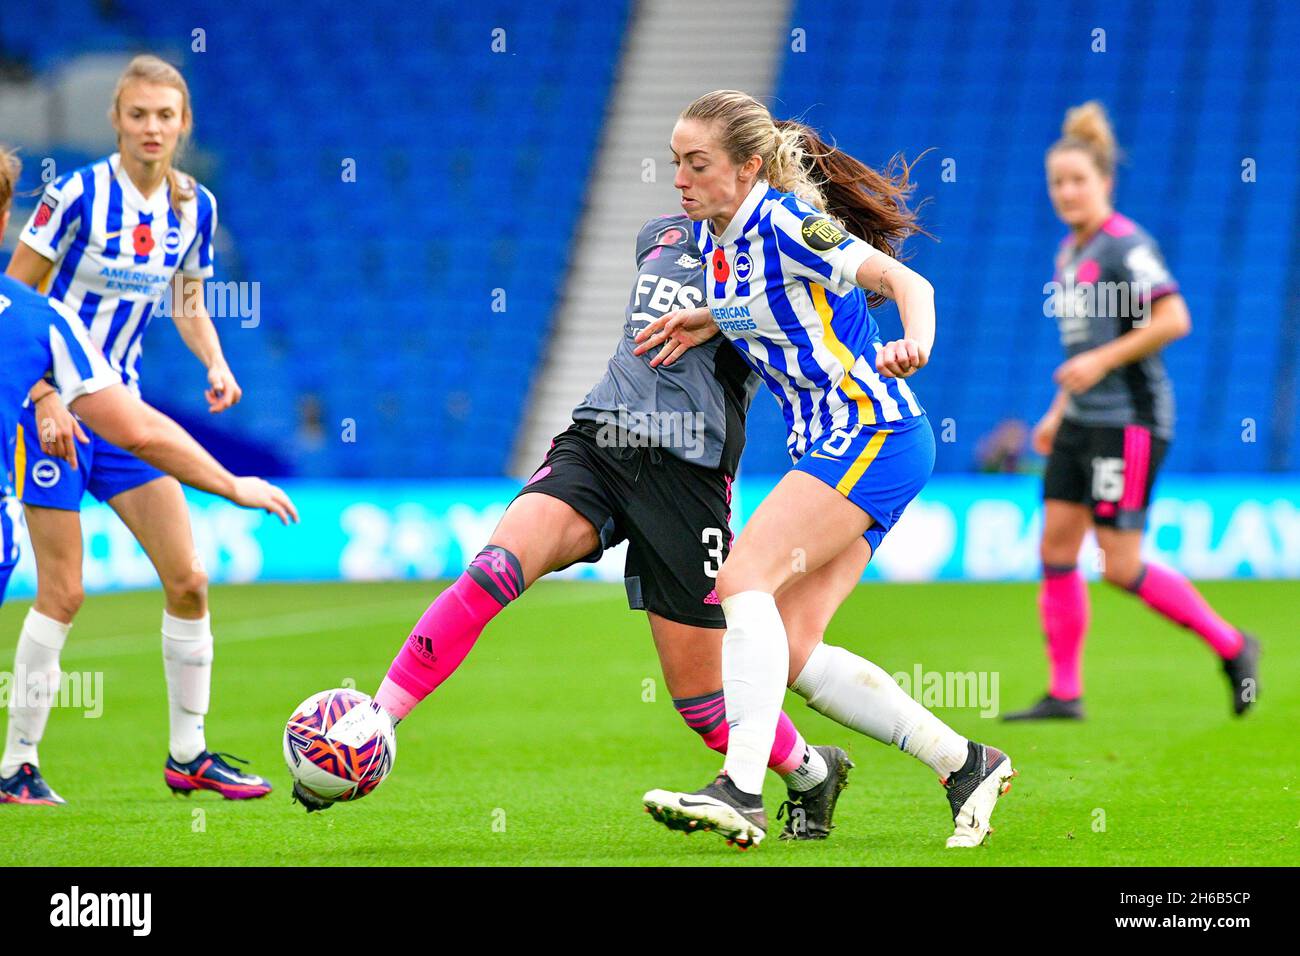 Brighton, UK. 14th Nov, 2021. Sam Tierney of leicester City and Megan Connolly of Brighton and Hove Albion battle for the ball during the FA Women's Super League match between Brighton & Hove Albion Women and Leicester City Women at The Amex on November 14th 2021 in Brighton, England. (Photo by Jeff Mood/phcimages.com) Credit: PHC Images/Alamy Live News Stock Photo